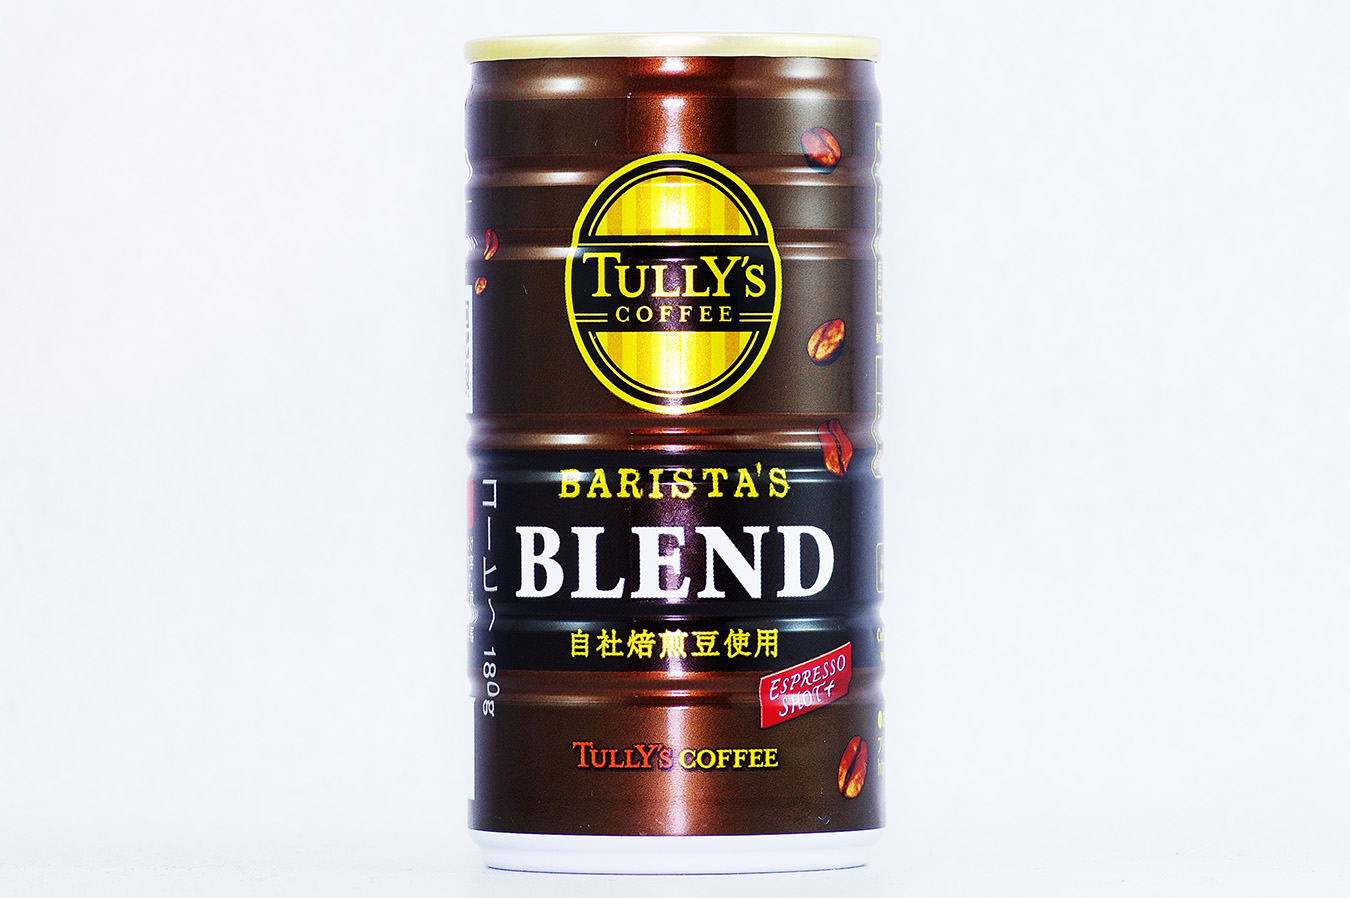 TULLY'S COFFEE BARISTA'S BLEND 2016年10月